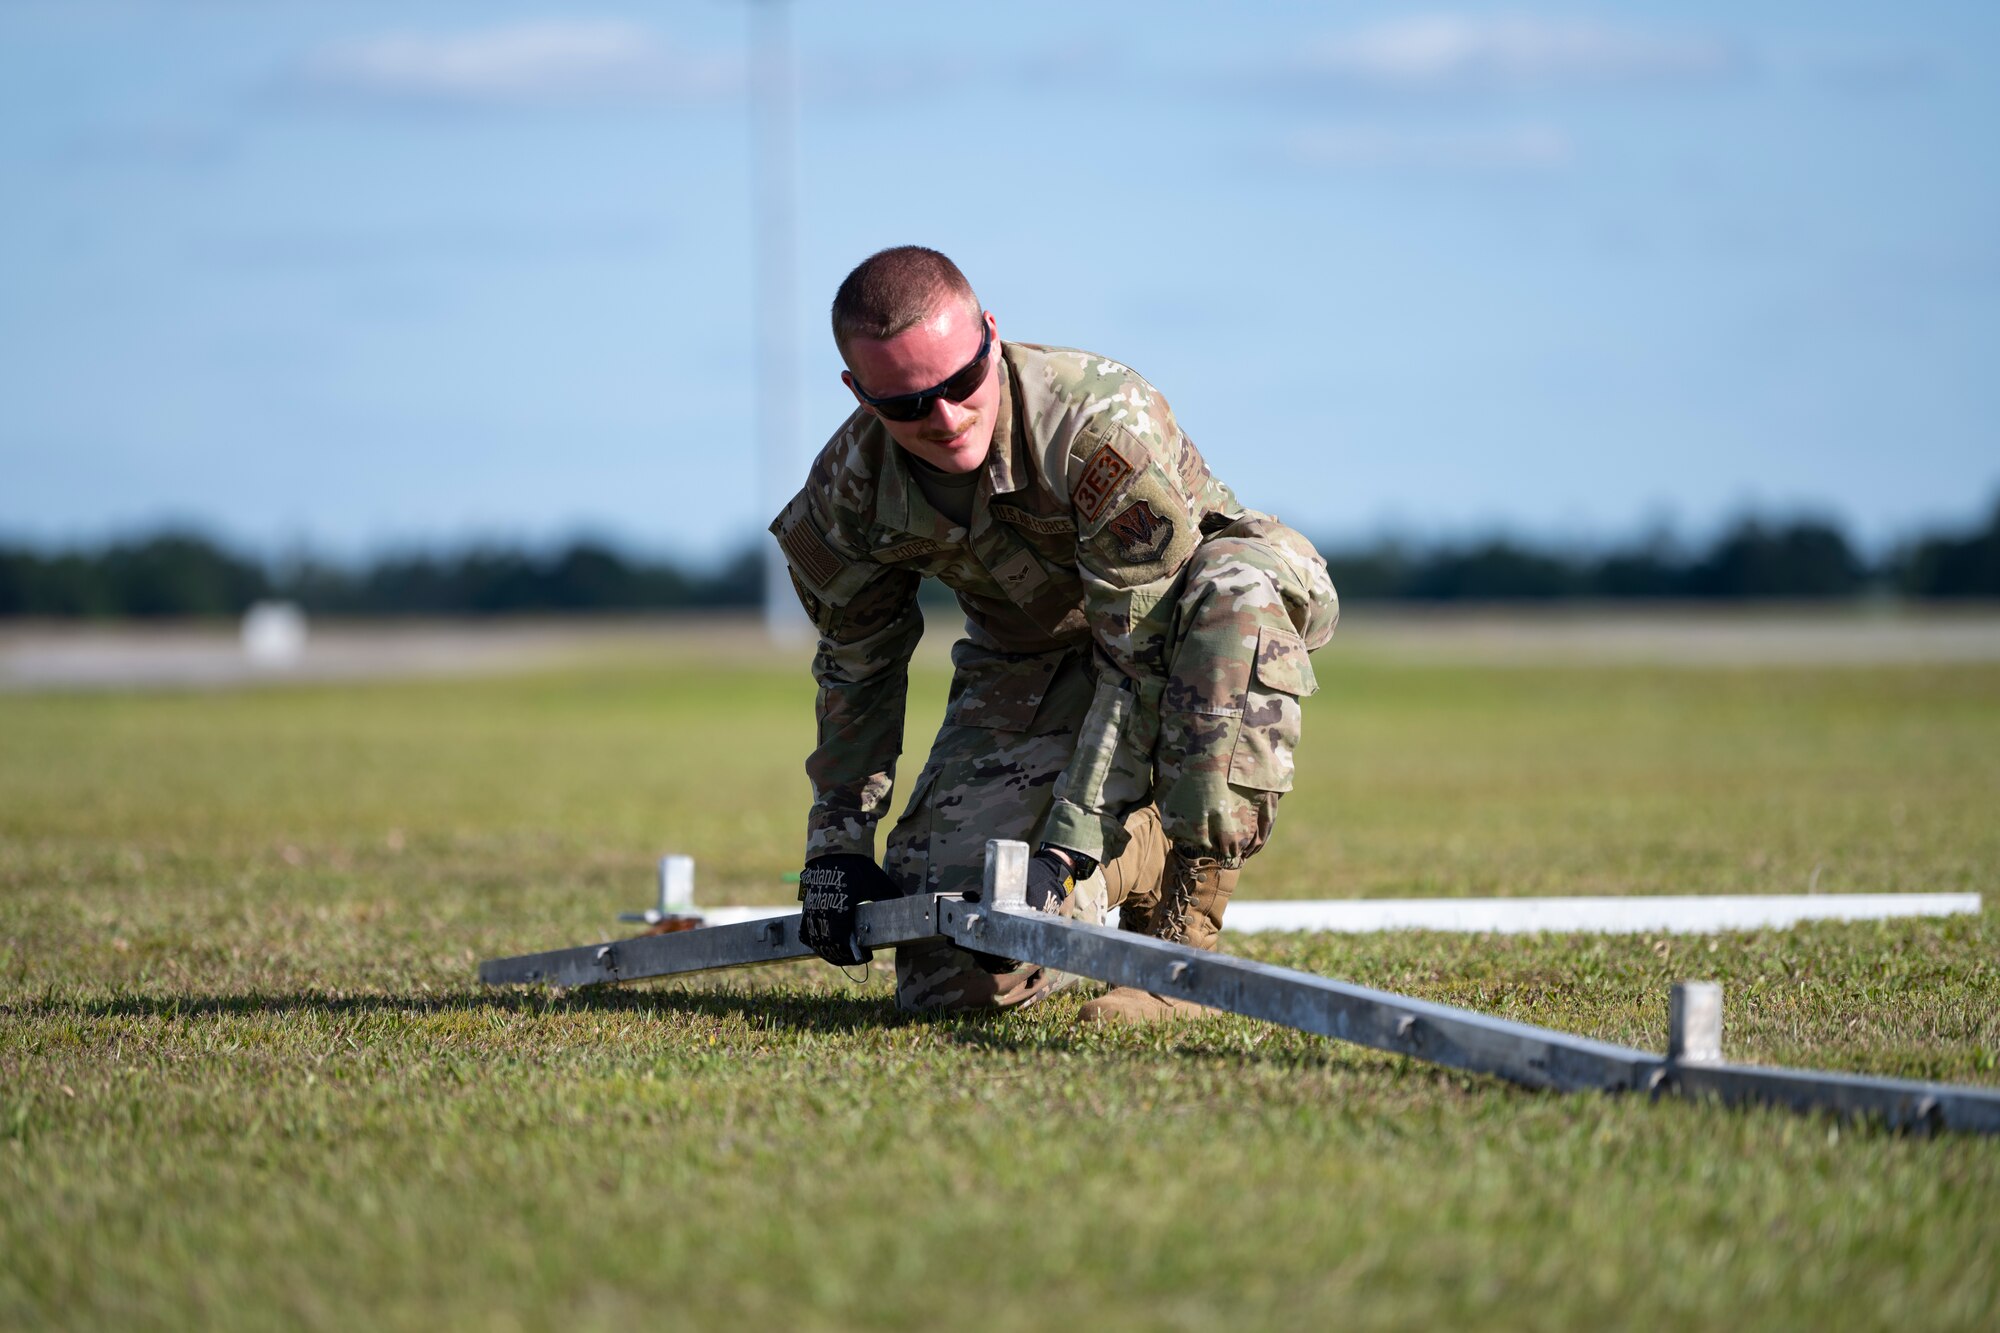 U.S. Air Force Airman 1st Class Nathaniel Cooper, 23rd Civil Engineer Squadron structural apprentice, assembles a shelter for exercise Ready Tiger 24-1 at Avon Park Air Force Range, Florida, April 8, 2024. The 23rd CES built shelters for communications, food provisions, and maintenance operations. Built upon Air Combat Command's directive to assert air power in contested environments, Exercise Ready Tiger 24-1 aims to test and enhance the 23rd Wing’s proficiency in executing Lead Wing and Expeditionary Air Base concepts through Agile Combat Employment and command and control operations. (U.S. Air Force photo by Senior Airman Rachel Coates)